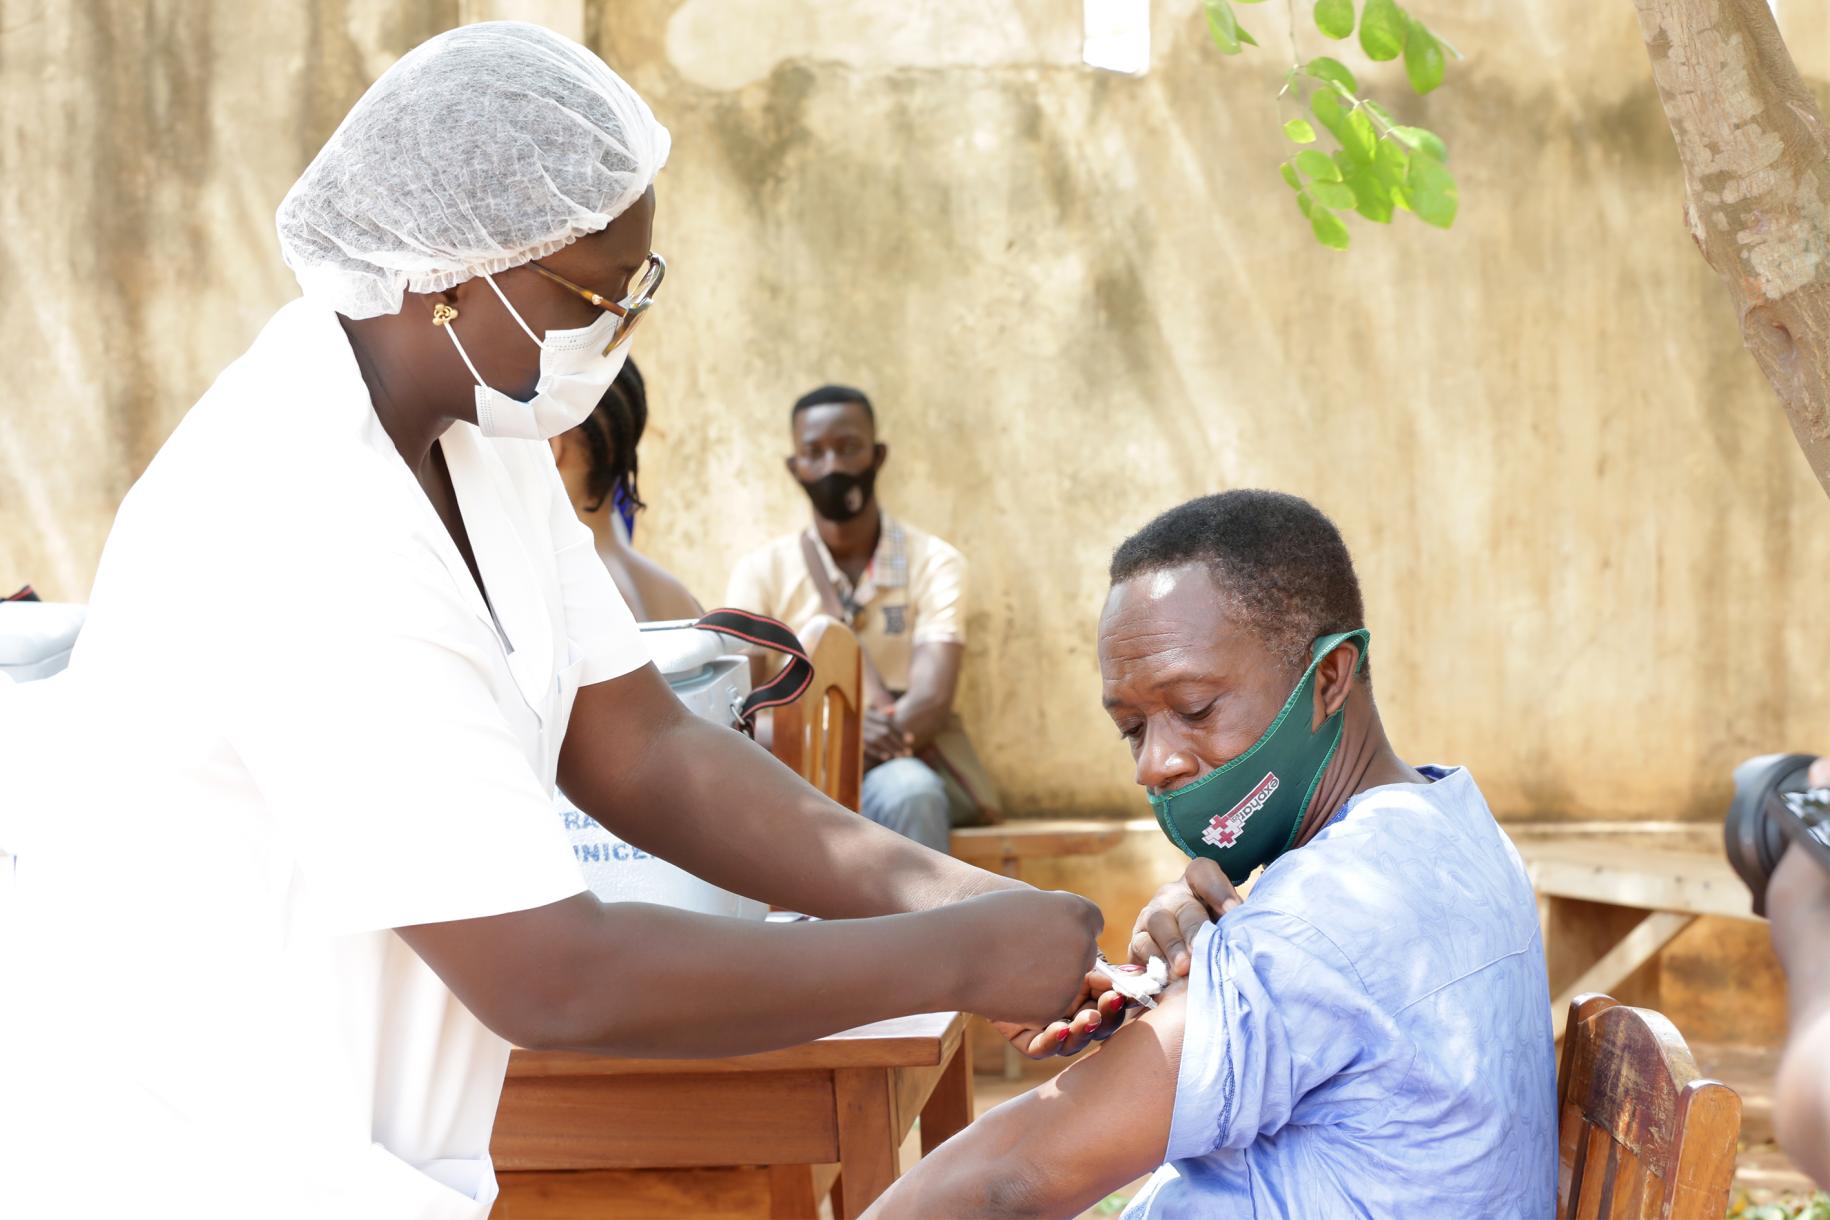 A man with a green mask receives a Covid-19 vaccine from a woman dressed in medical gear. 